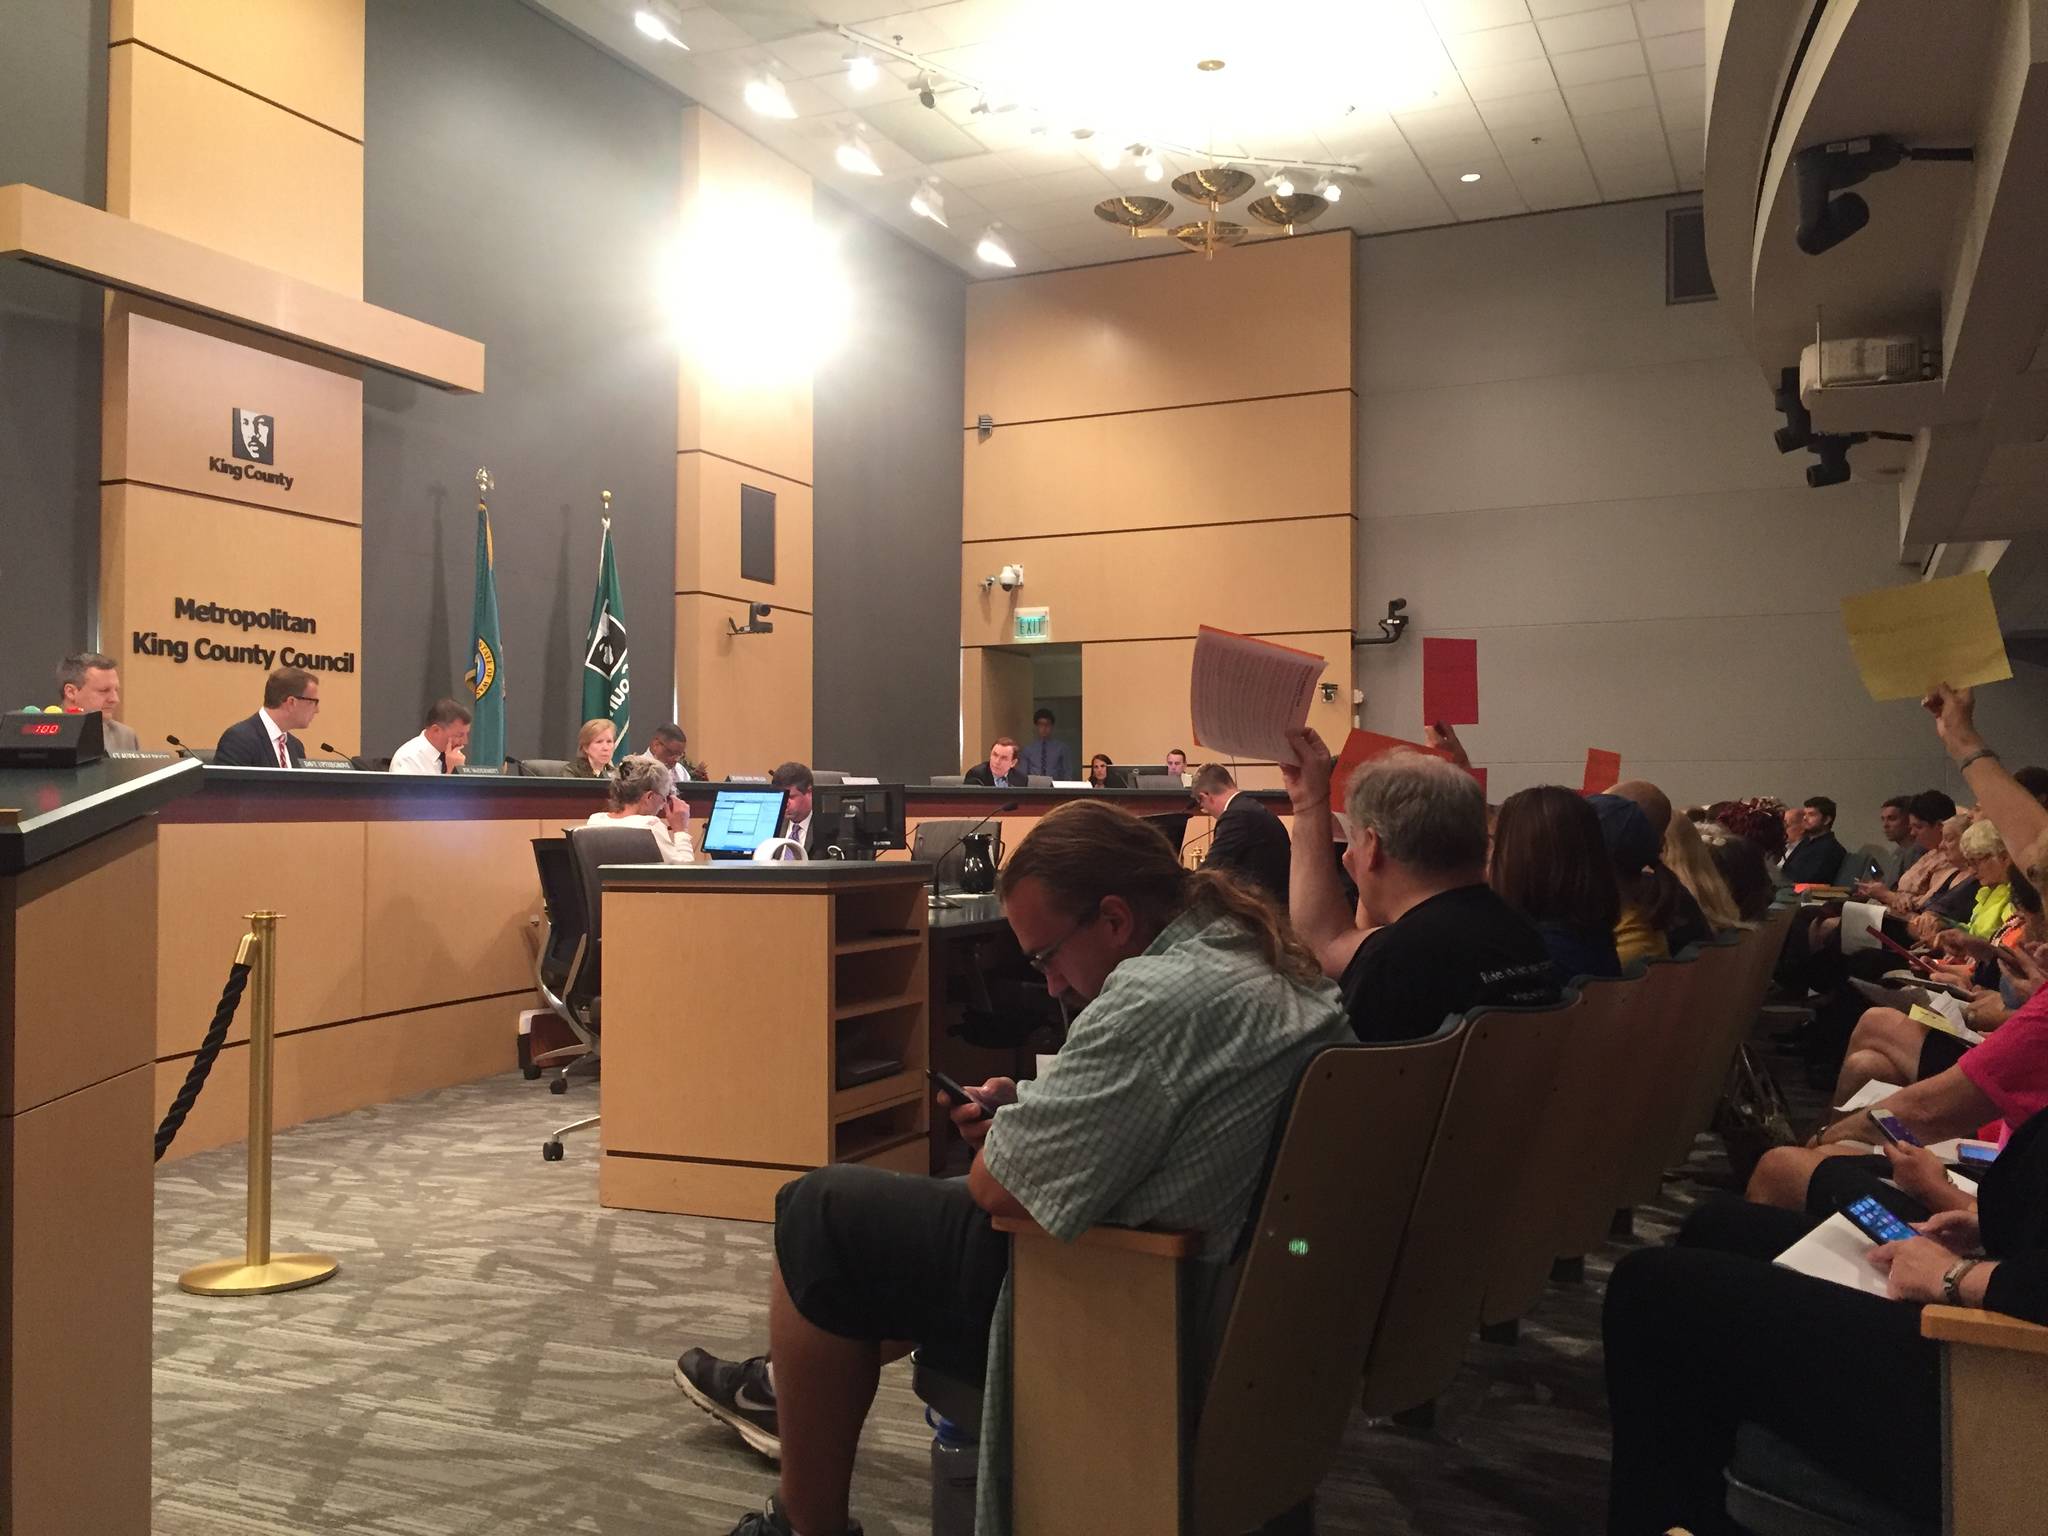 Members of the public held signs reading “homes over homeruns” and “#teamhousing” at the King County Council’s July 20 hearing. Photo by Josh Kelety